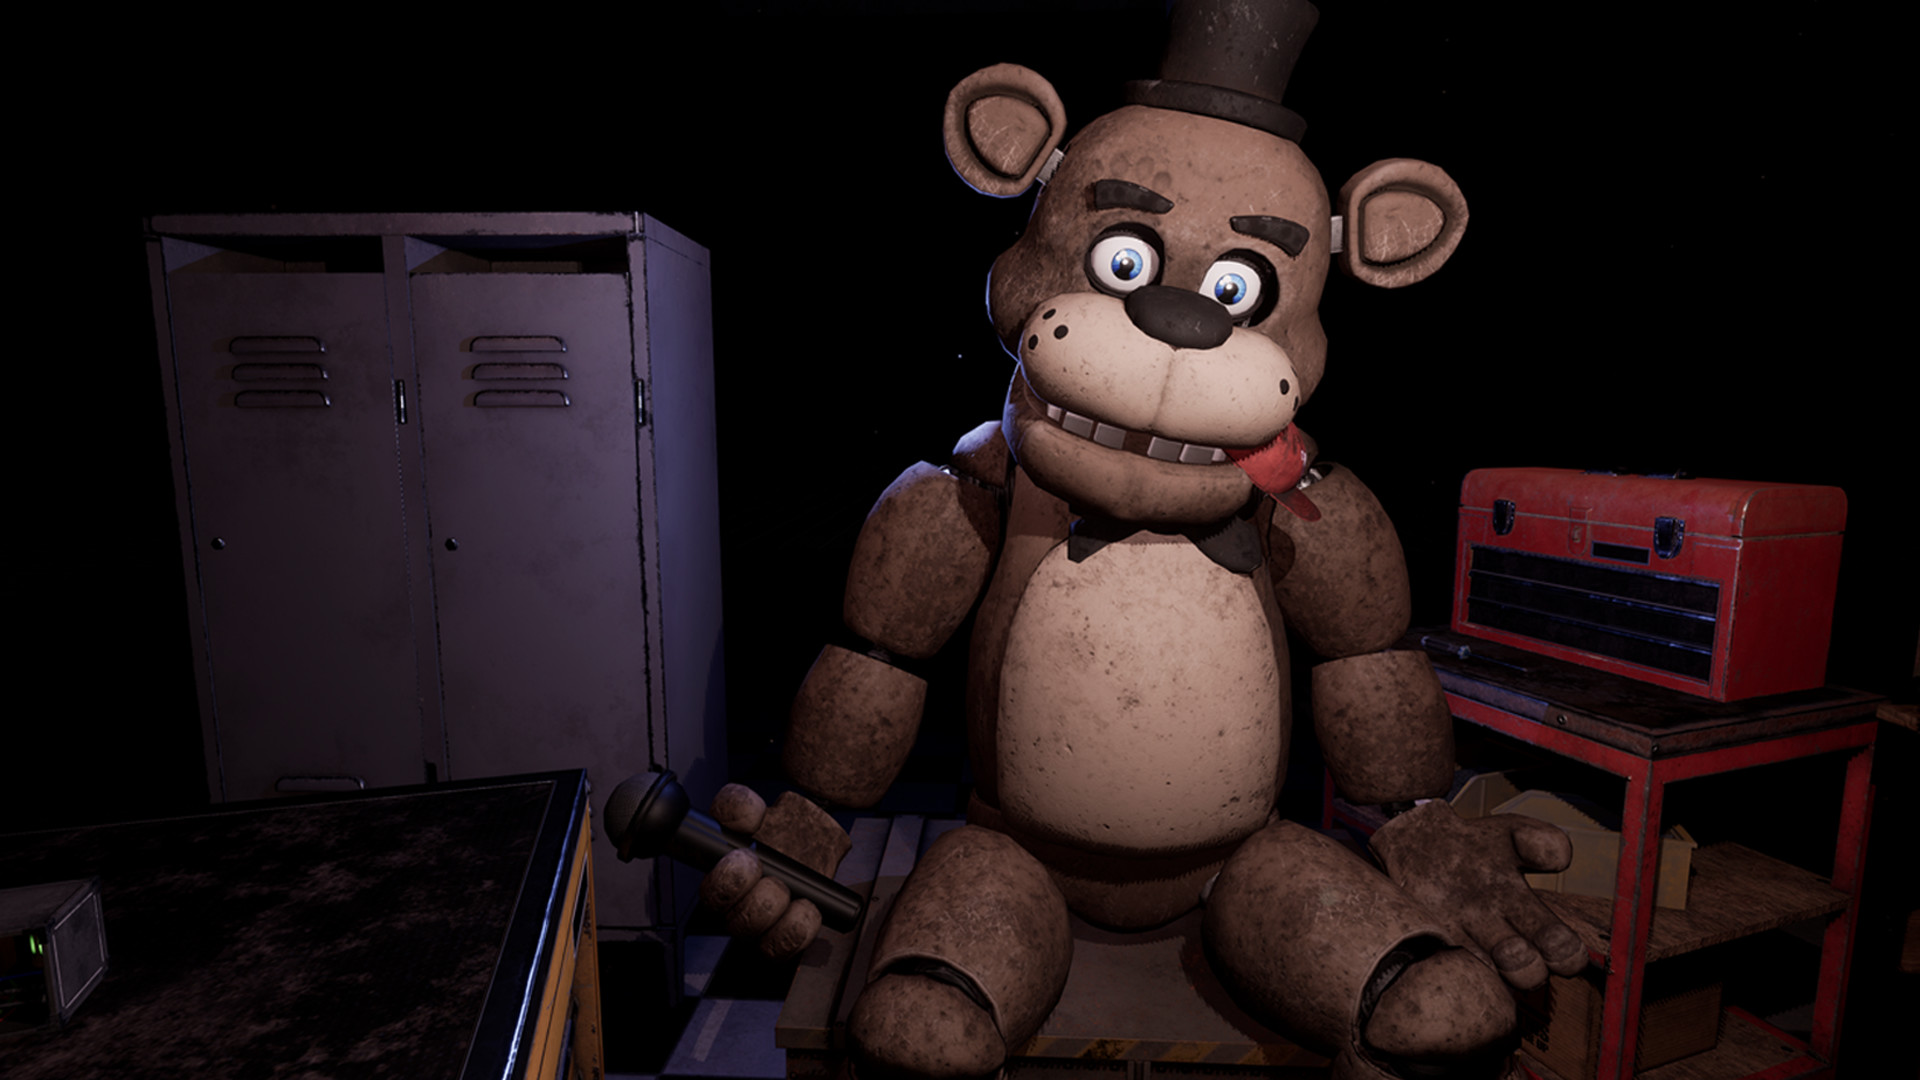 Five Nights At Freddy S Help Wanted On Steam